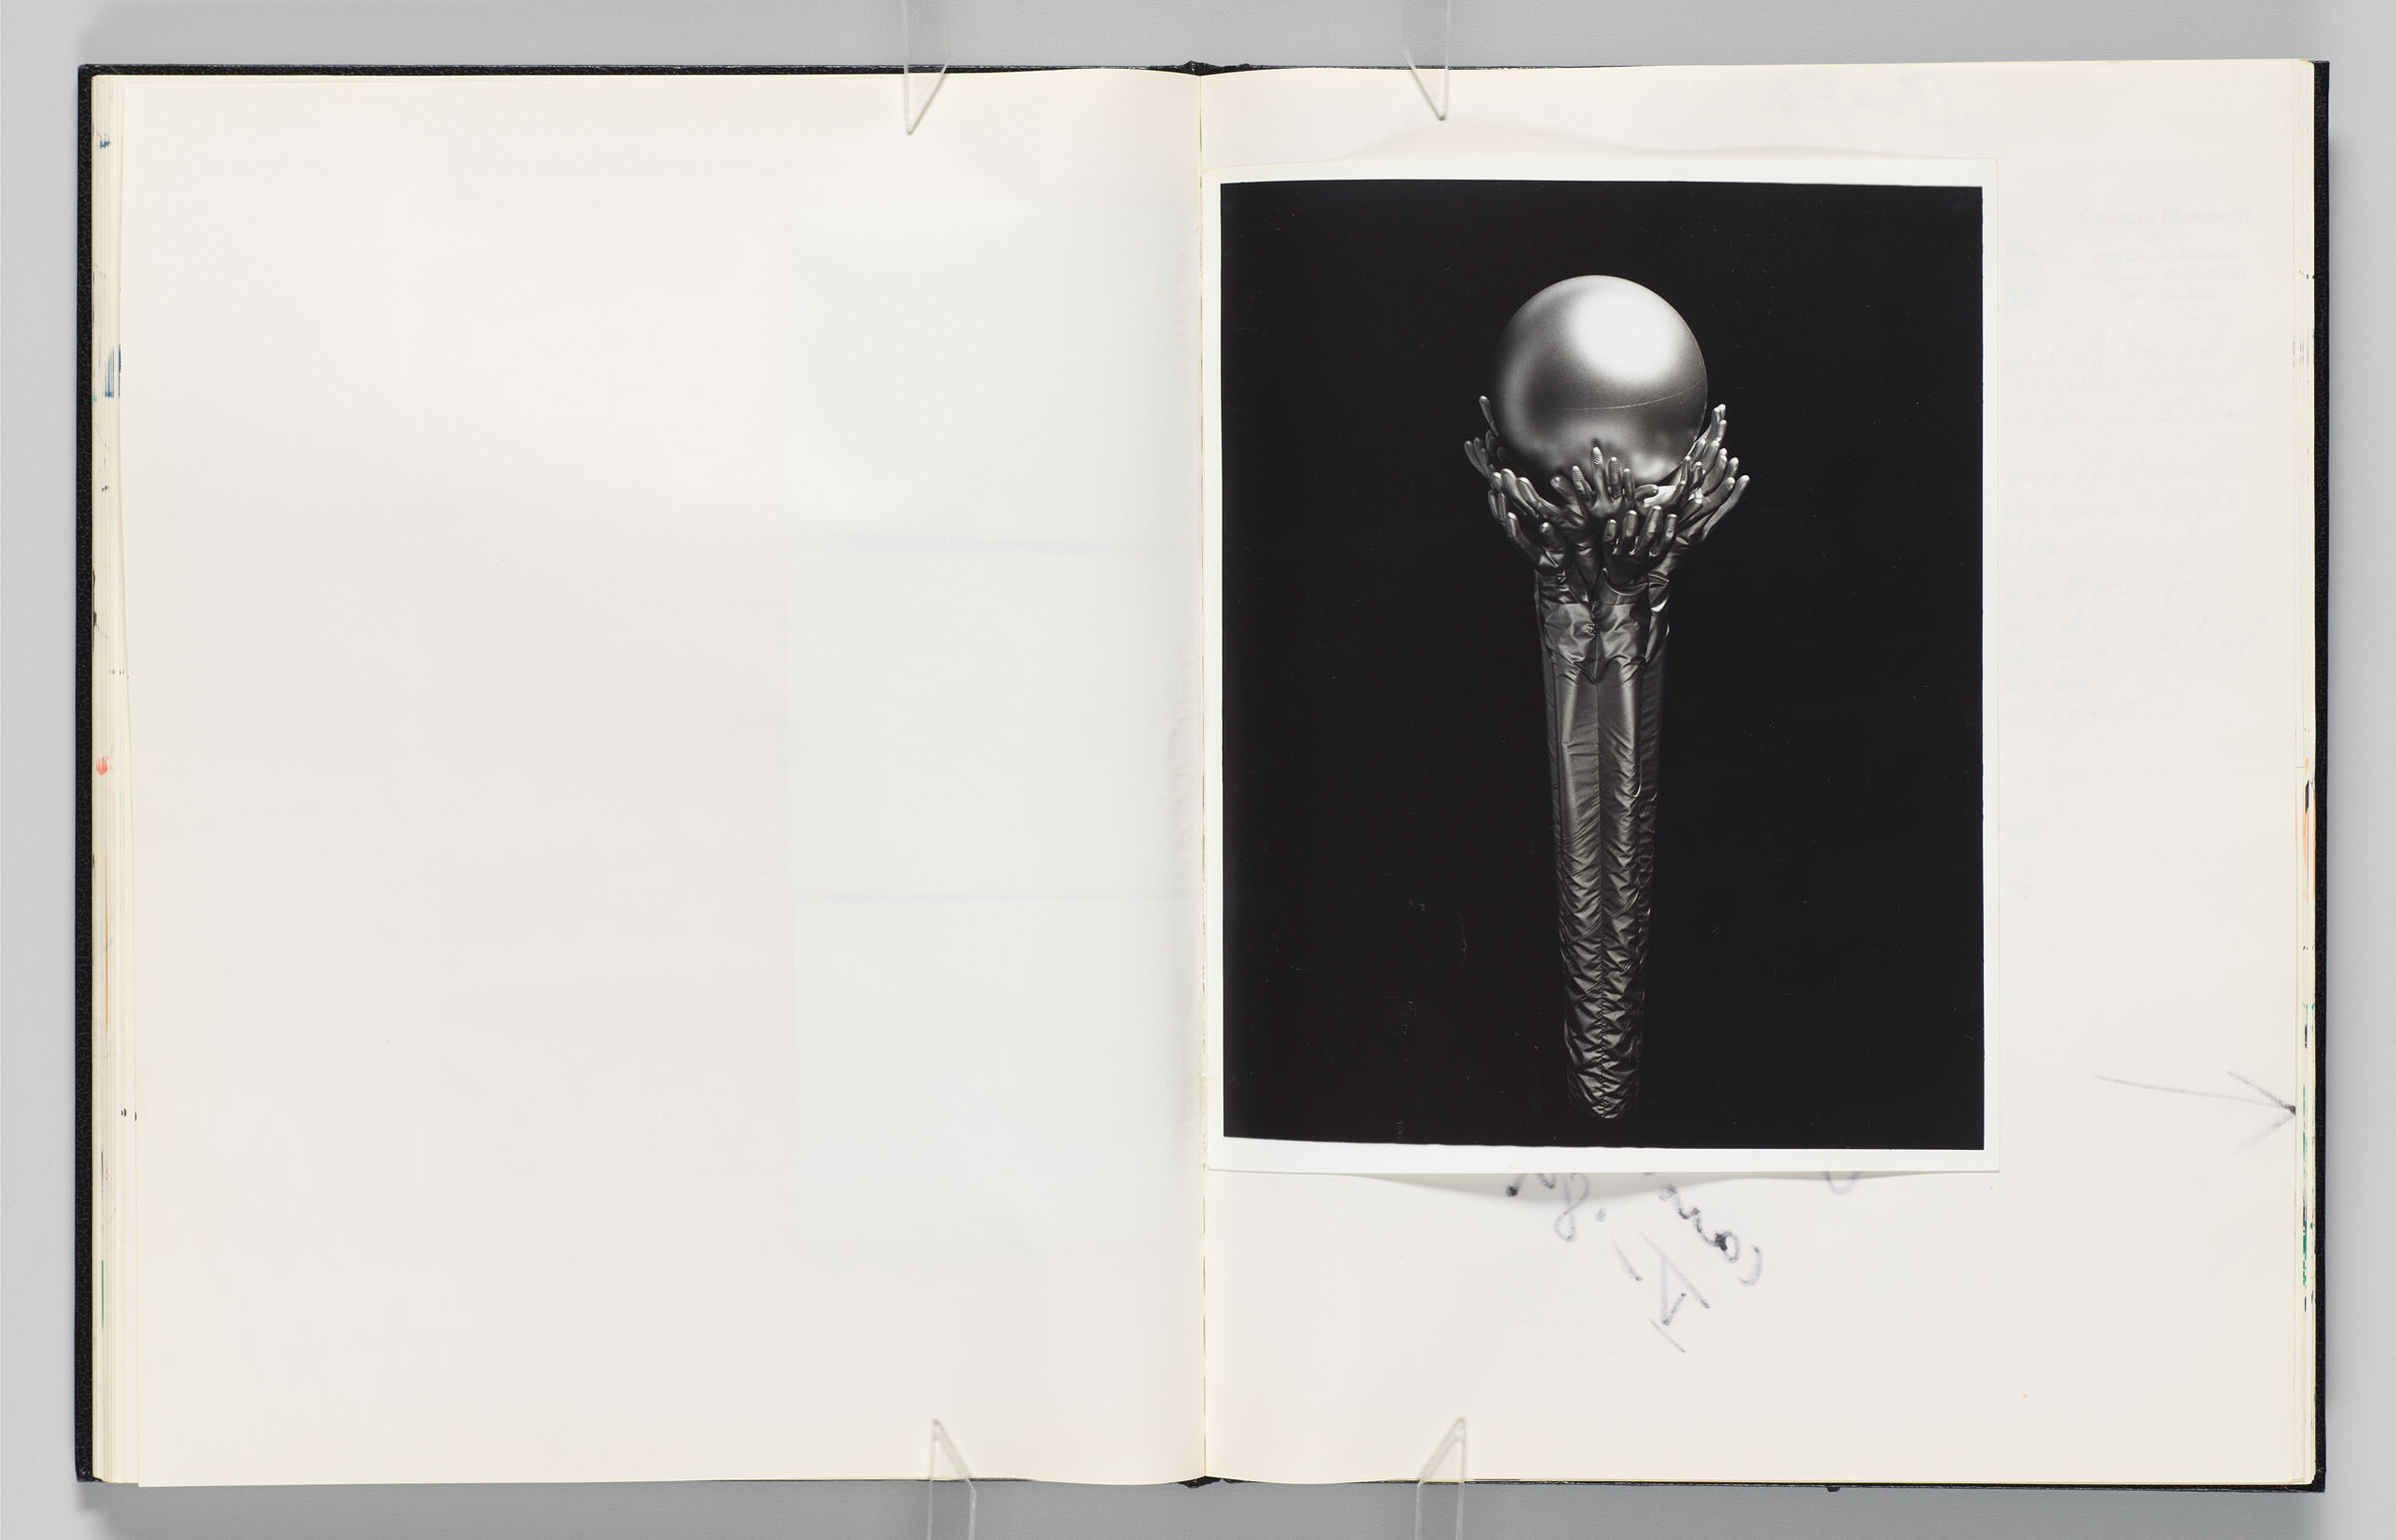 Untitled (Blank, Left Page); Untitled (Photographs Of Maquette (Hands Holding Globe), Right Page)